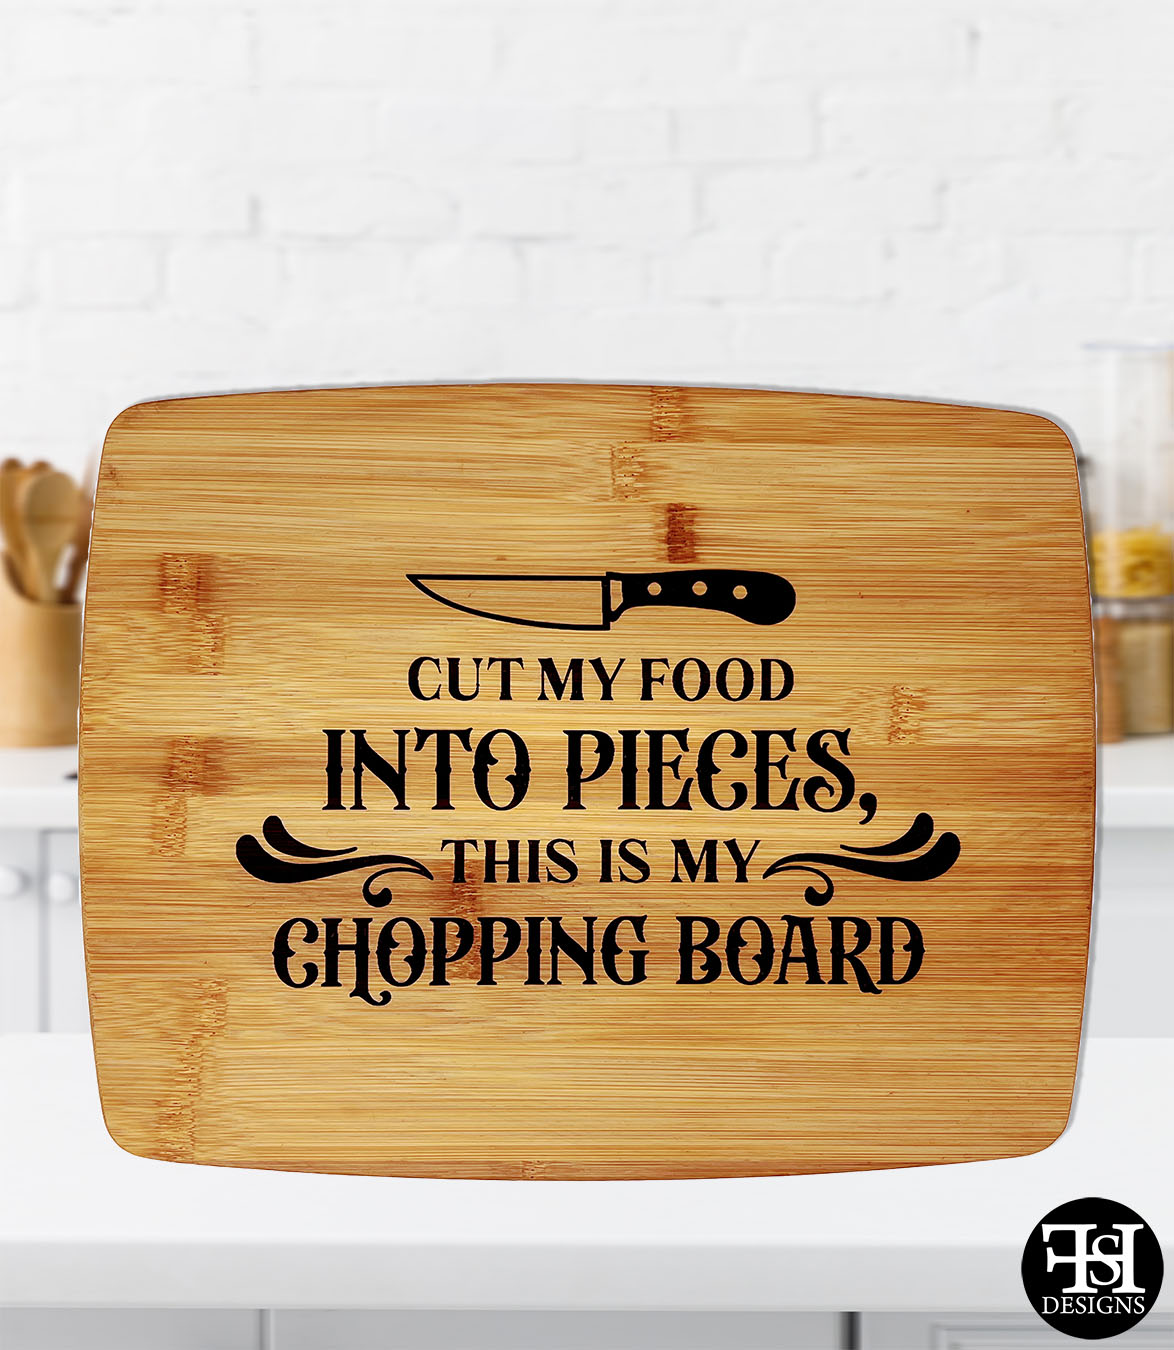 https://www.fhsdesigns.com/wp-content/uploads/cutting-board-bamboo-cut-my-life-into-pieces-this-is-my-chopping-board-live-bg.jpg